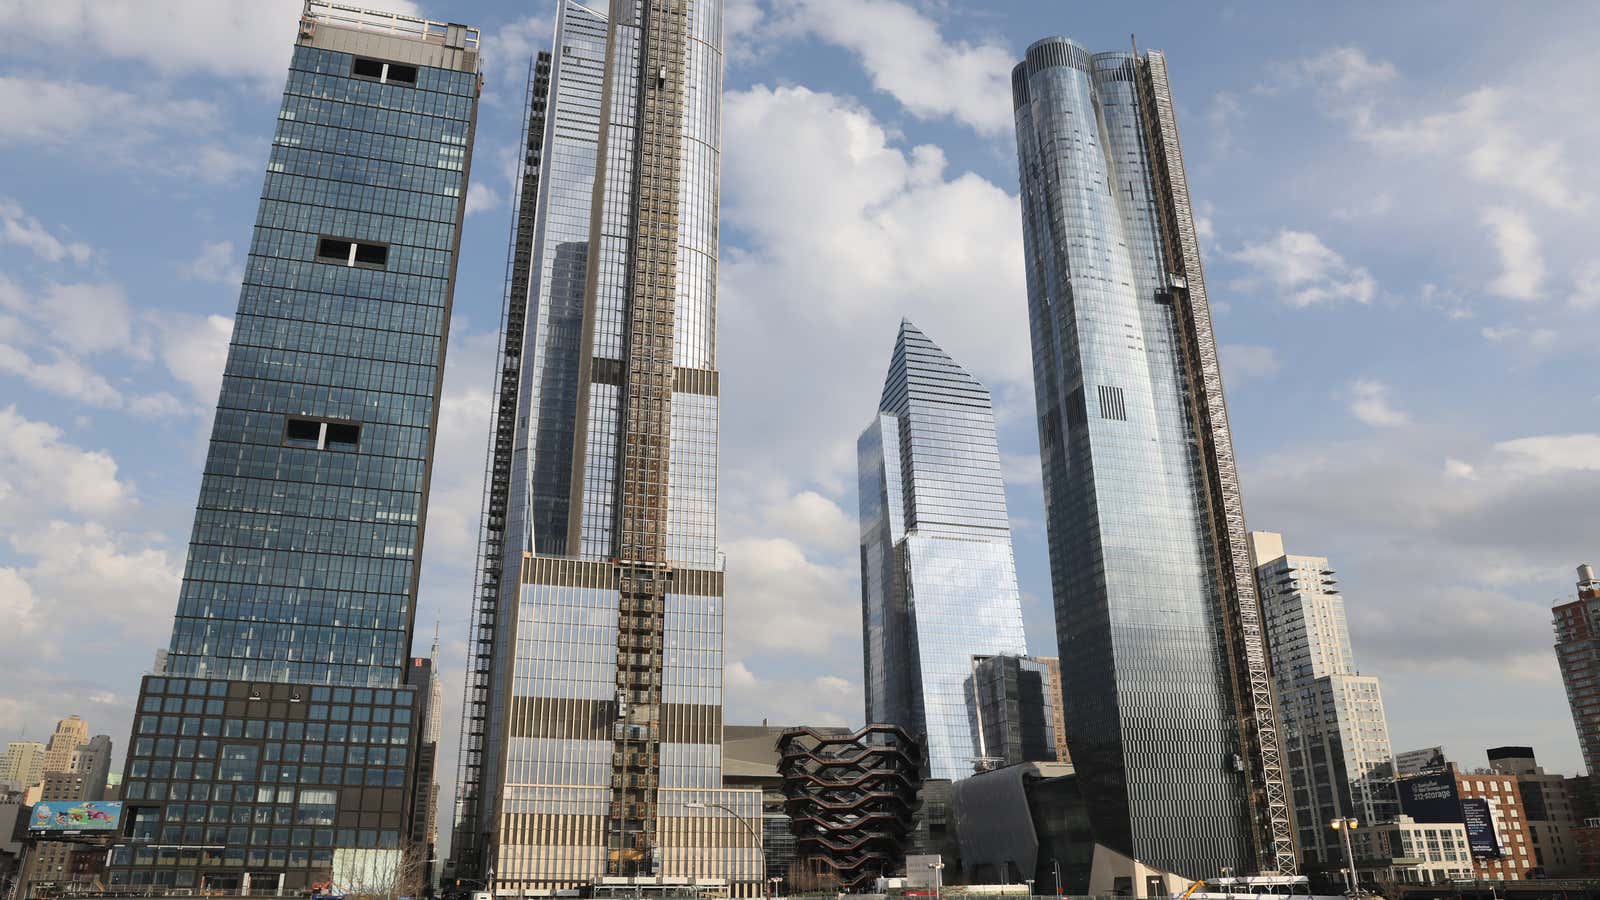 New York City’s Hudson Yards were the result of a public-private partnership.